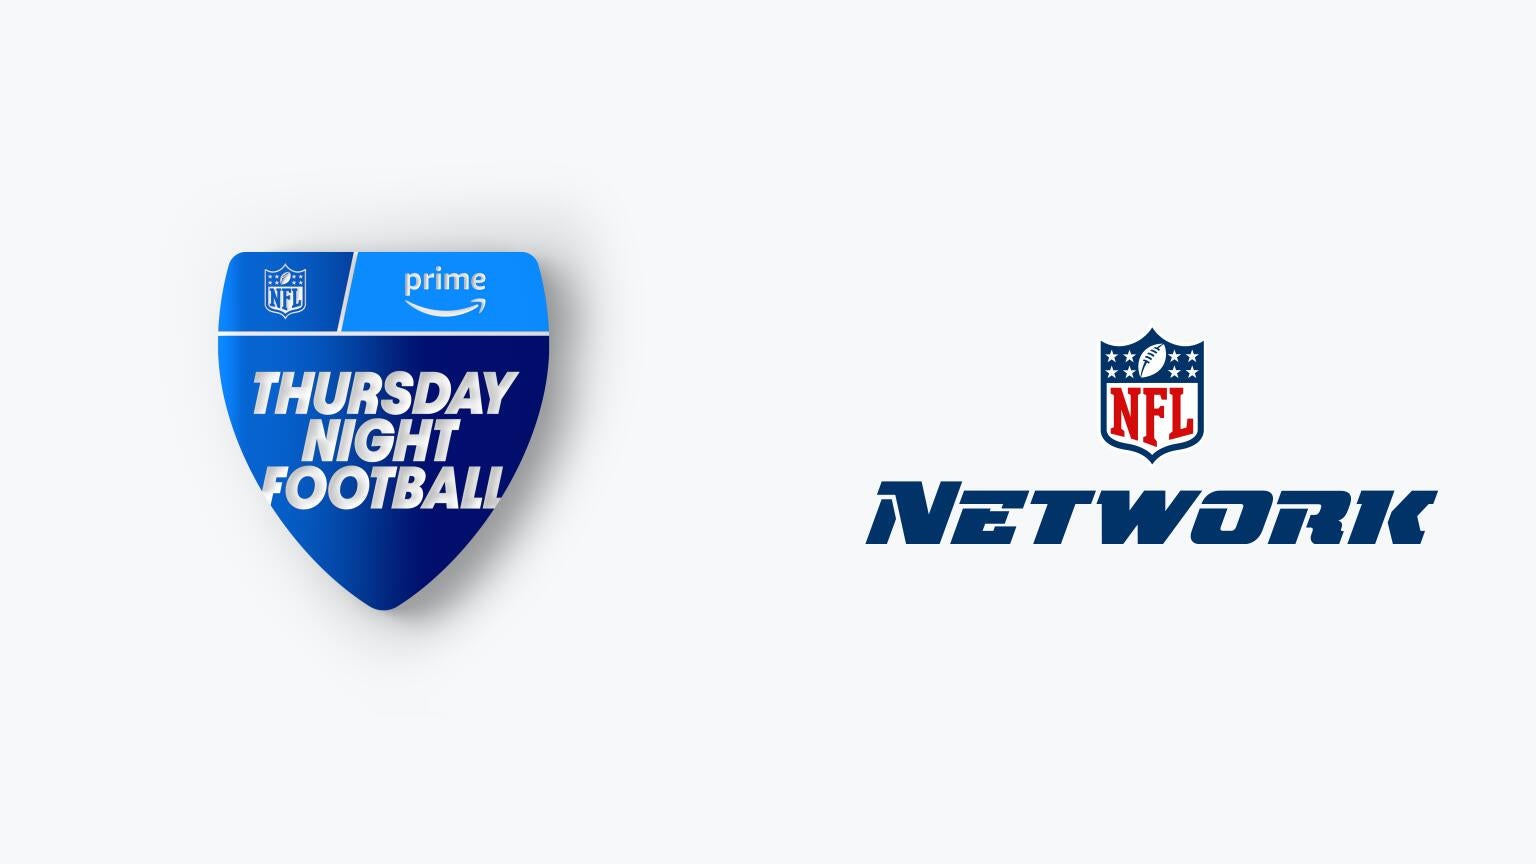 Can You Watch Thursday Night Football on NFL Network? – The Streamable